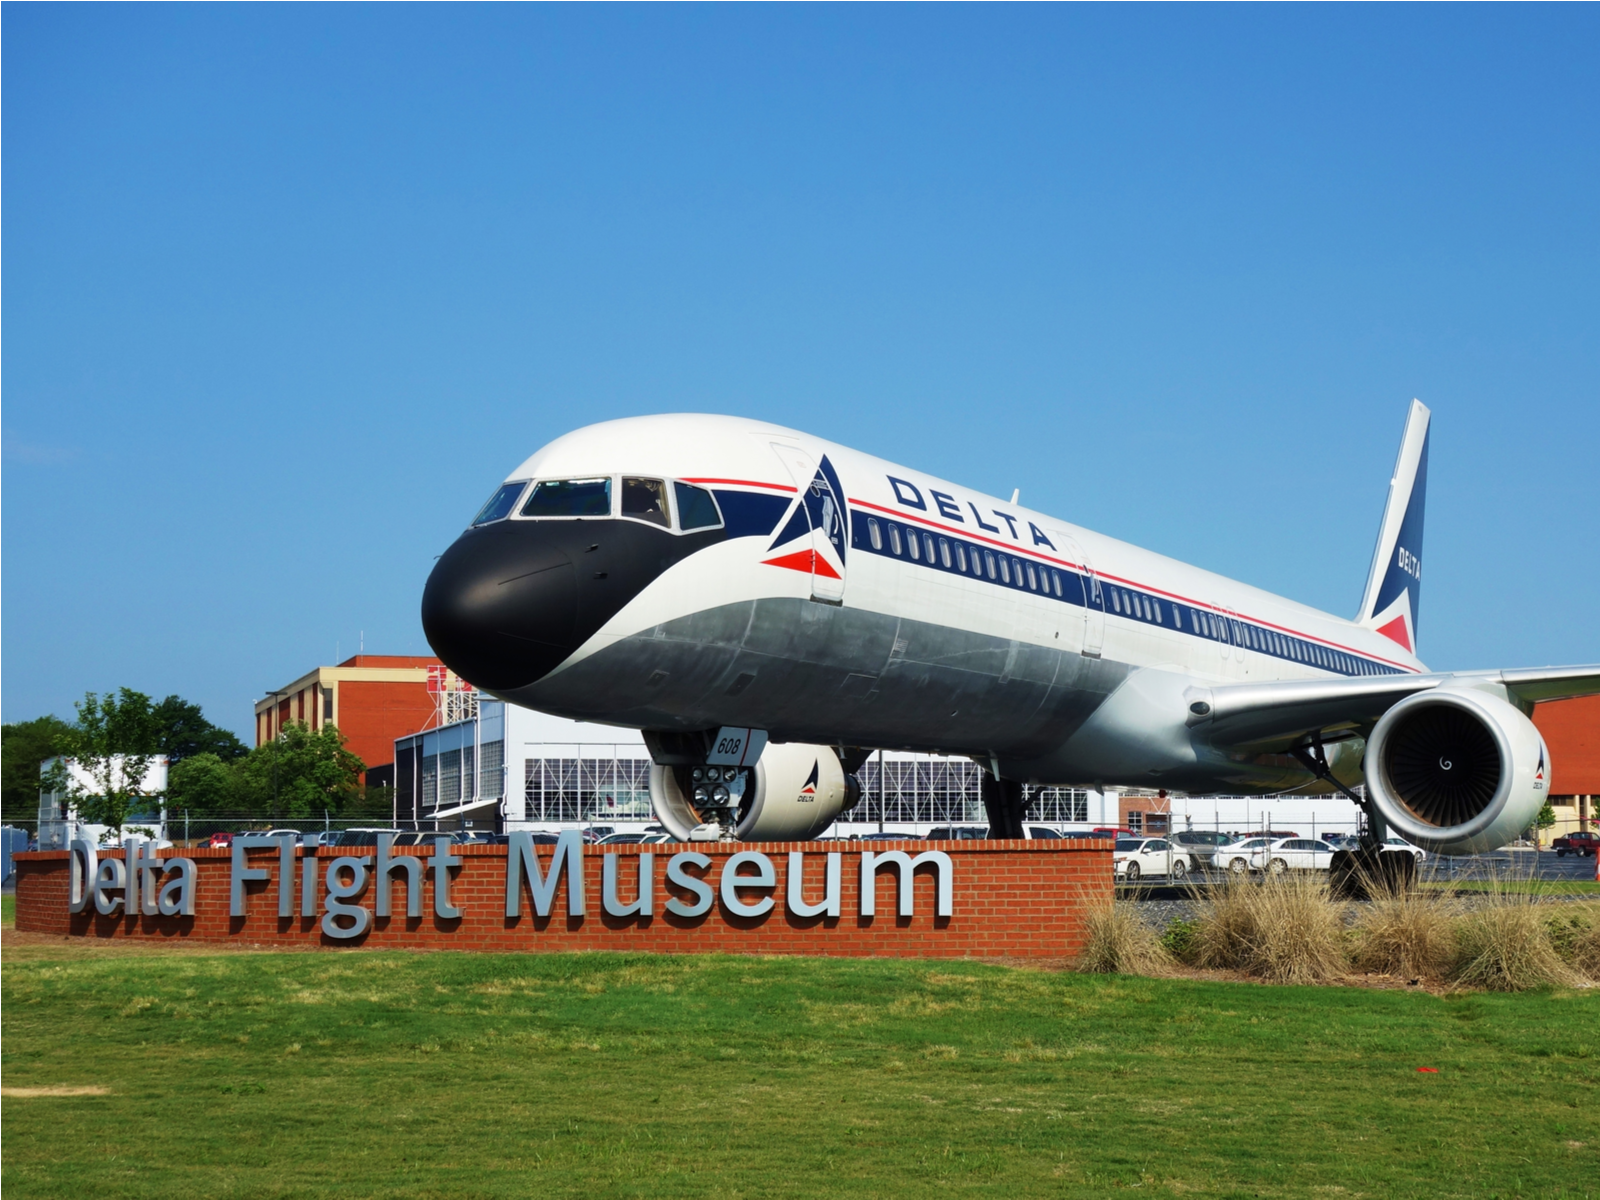 A large white passenger plane displayed behind Delta Flight Museum's, one of the best tourist attractions in Georgia, signage fronting a green landscape